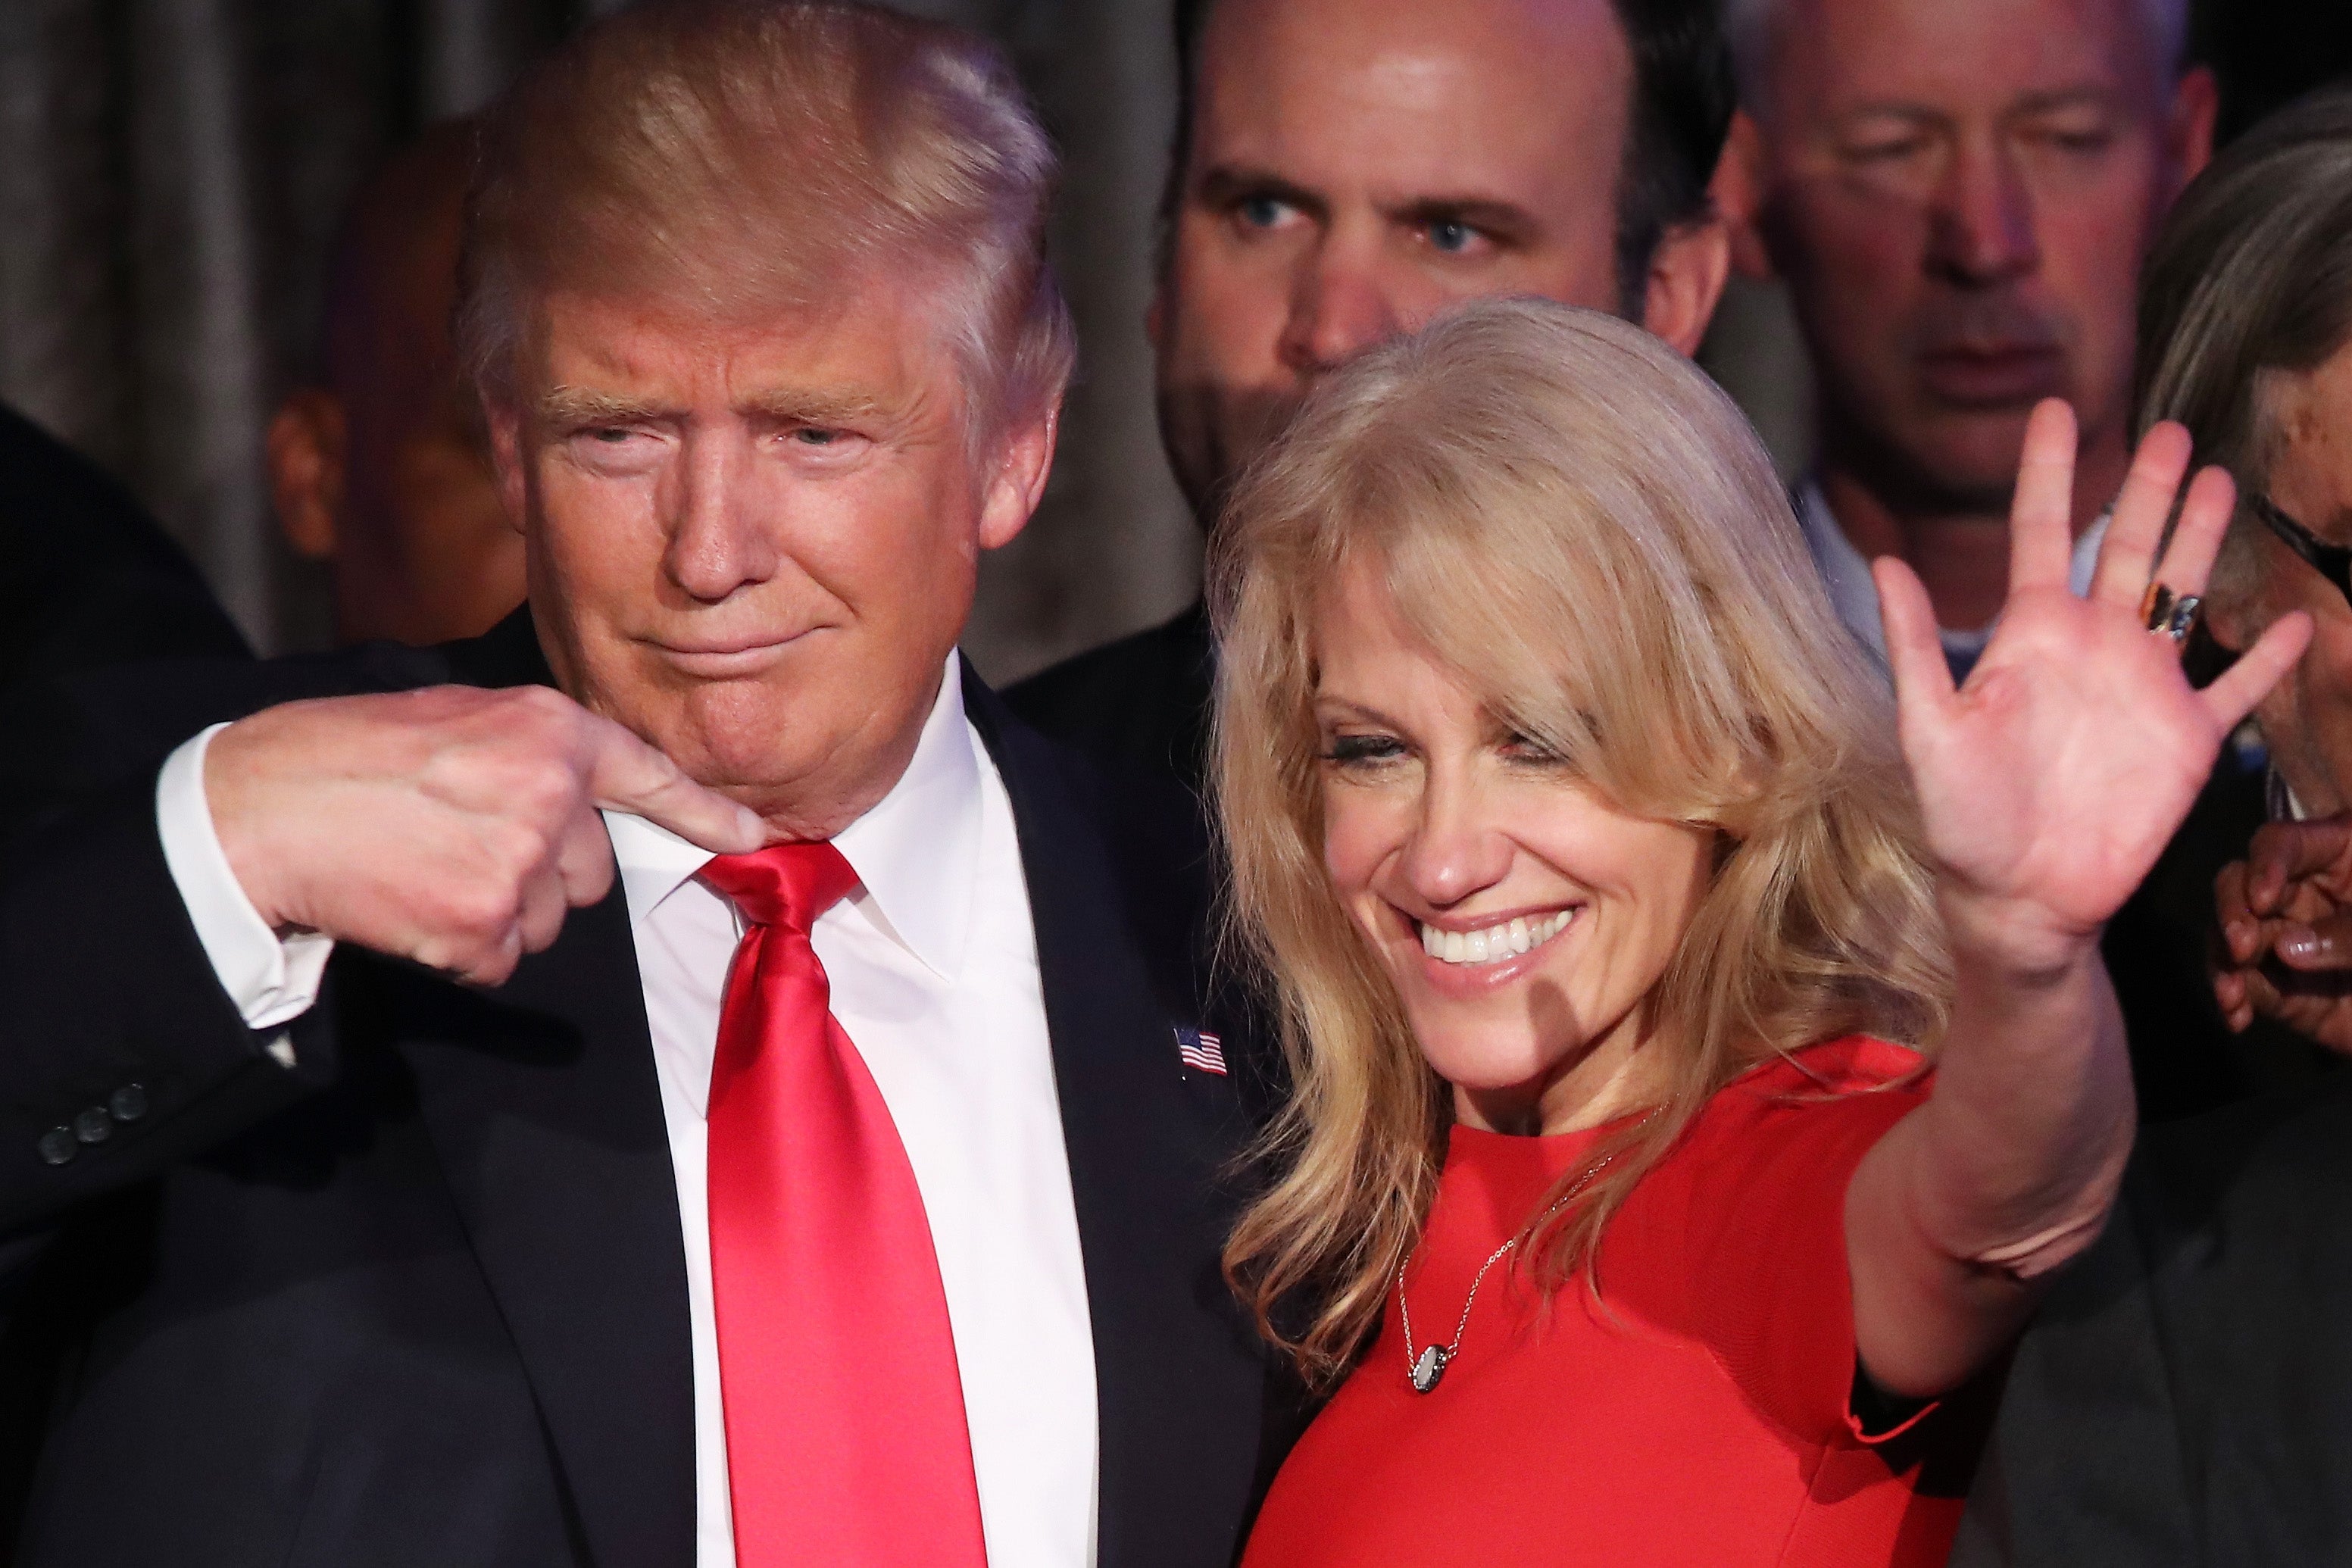 Republican president-elect Donald Trump along with his campaign manager Kellyanne Conway acknowledge the crowd during his election night event at the New York Hilton Midtown in the early morning hours of November 9, 2016 in New York City